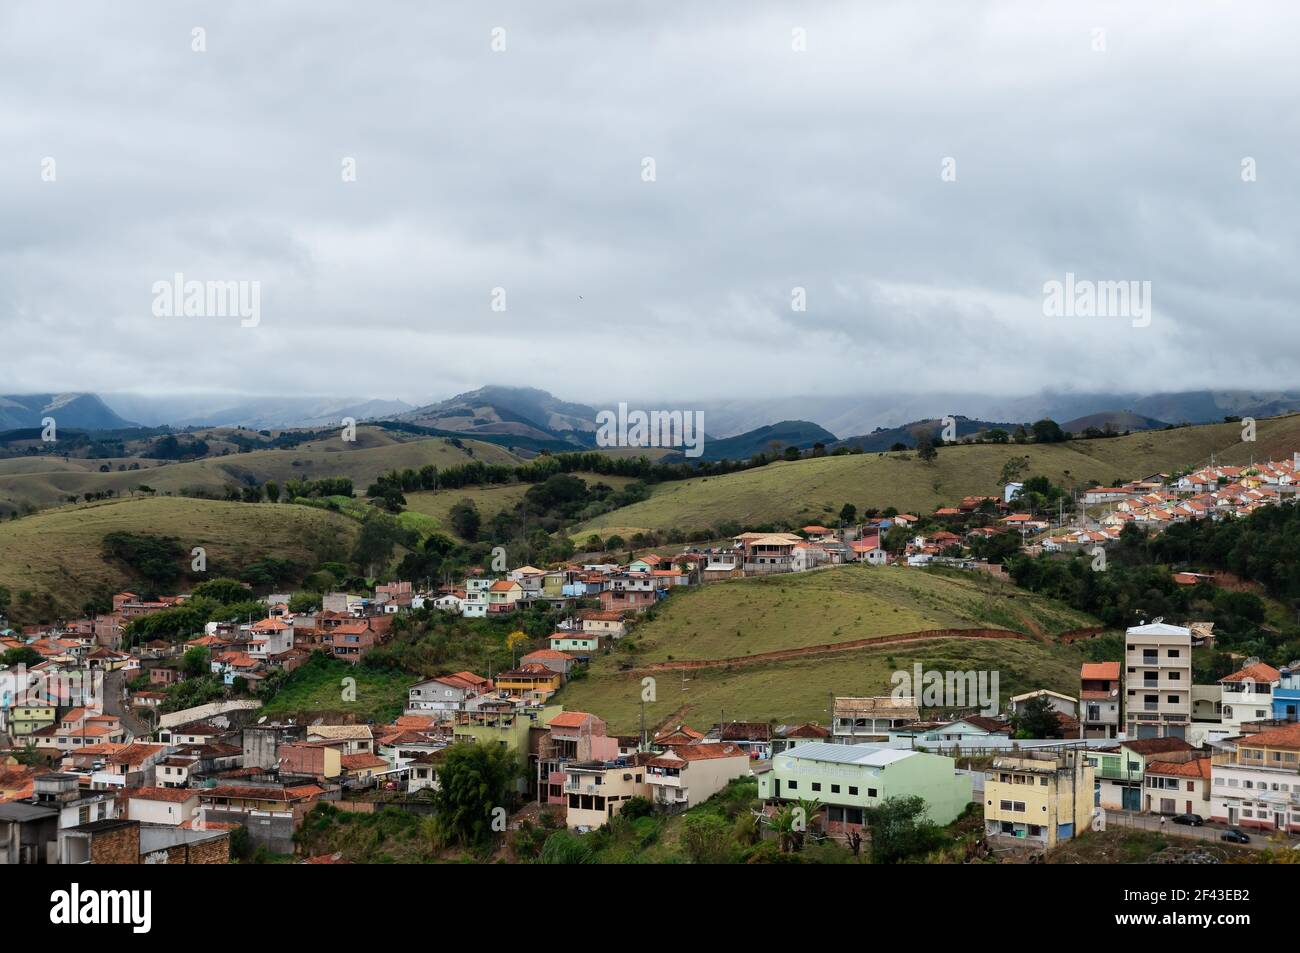 Northeast view of a residential area on hilly side of Cunha municipality in early morning and under overcast sky. Stock Photo